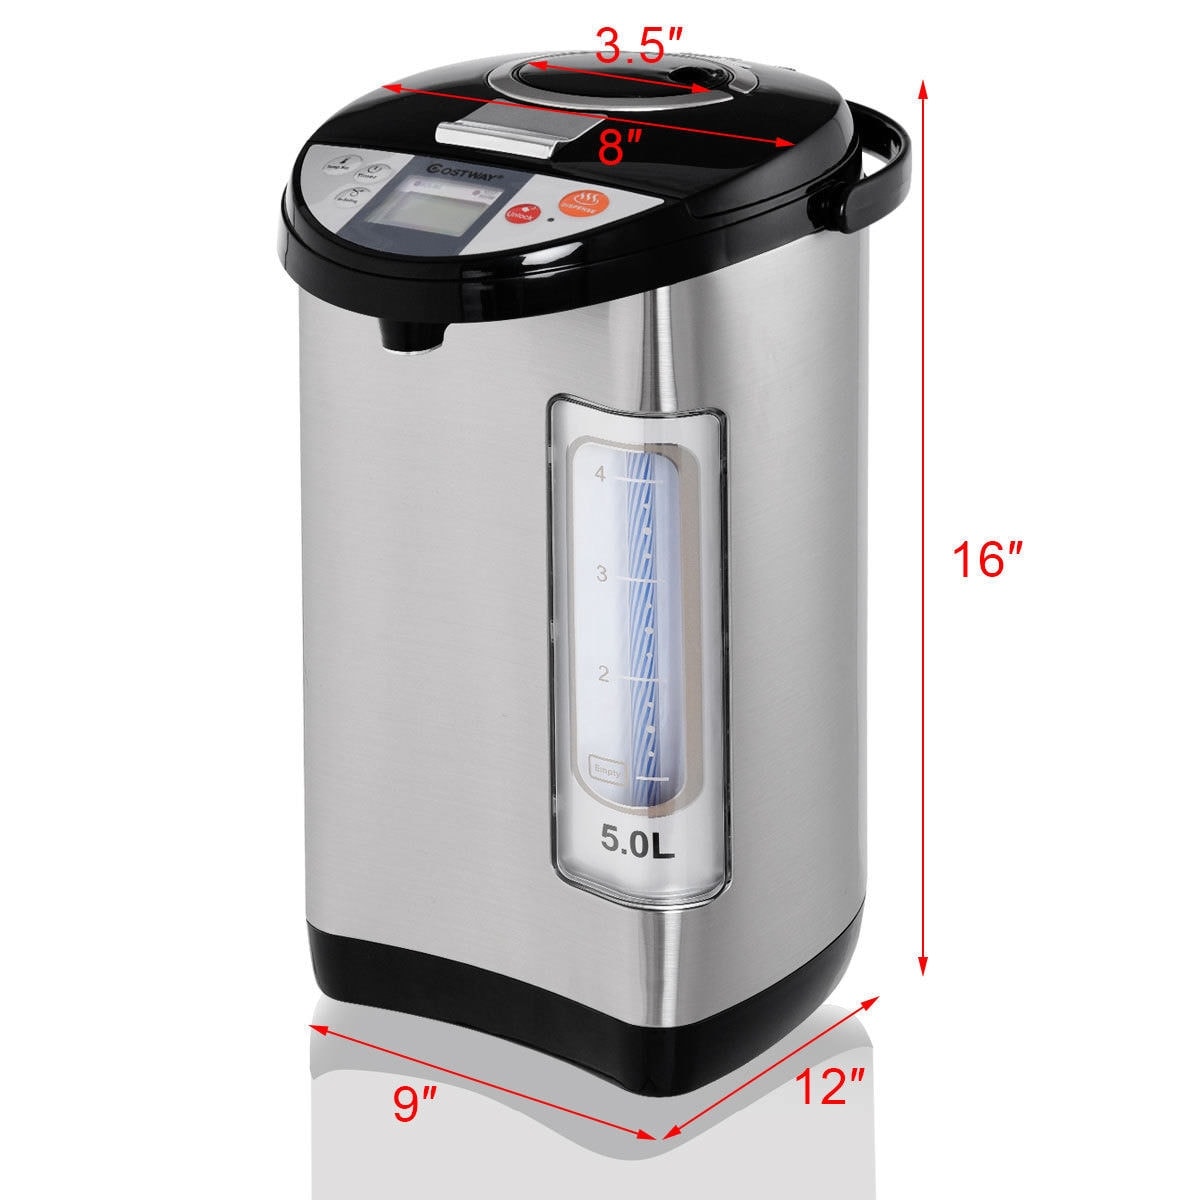 https://ak1.ostkcdn.com/images/products/is/images/direct/2277e854535c21f92164892101bfcb7e1ccc0cf1/Costway-5-Liter-LCD-Water-Boiler-and-Warmer-Electric-Hot-Pot-Kettle-Hot-Water-Dispenser.jpg